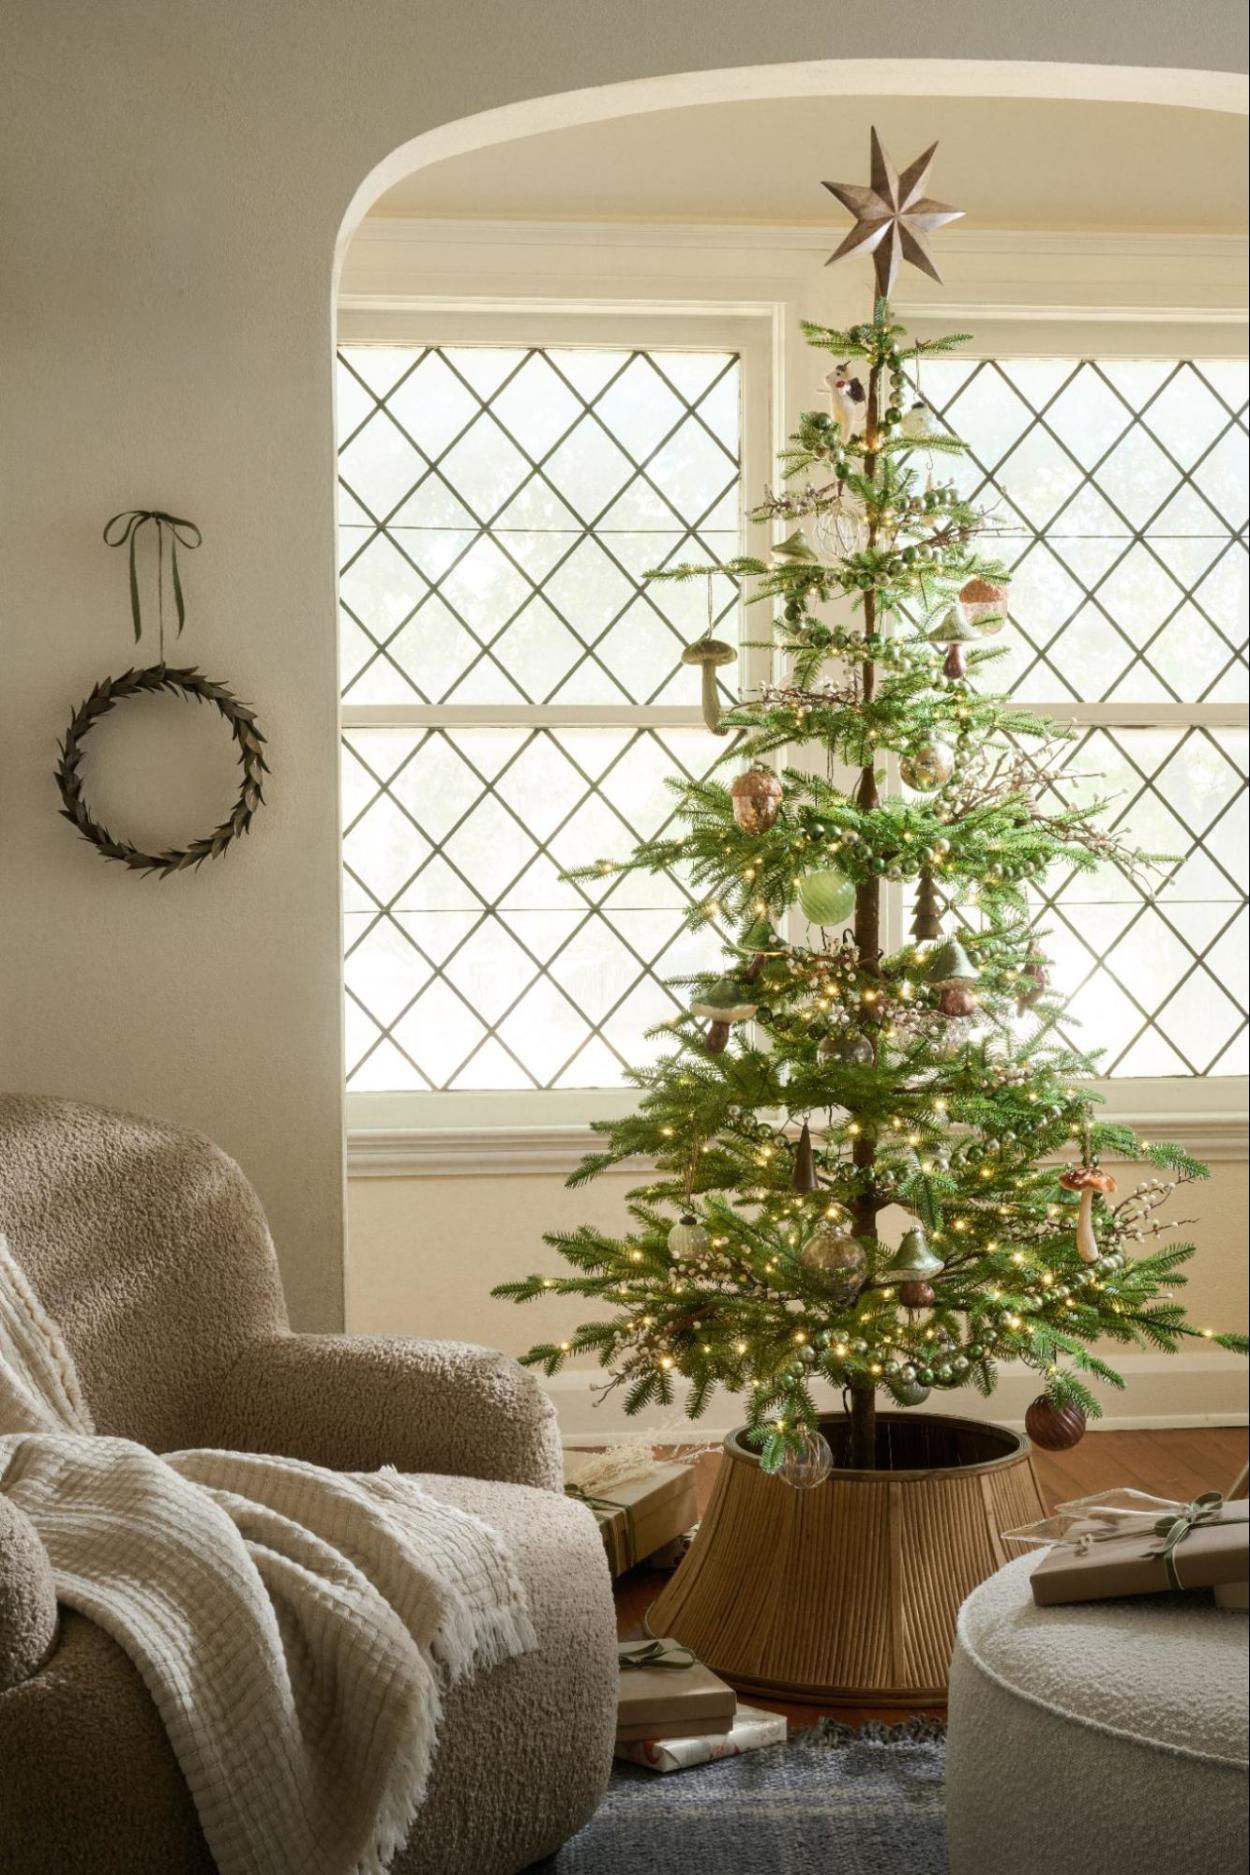 Trim Your Christmas Tree for the Holidays